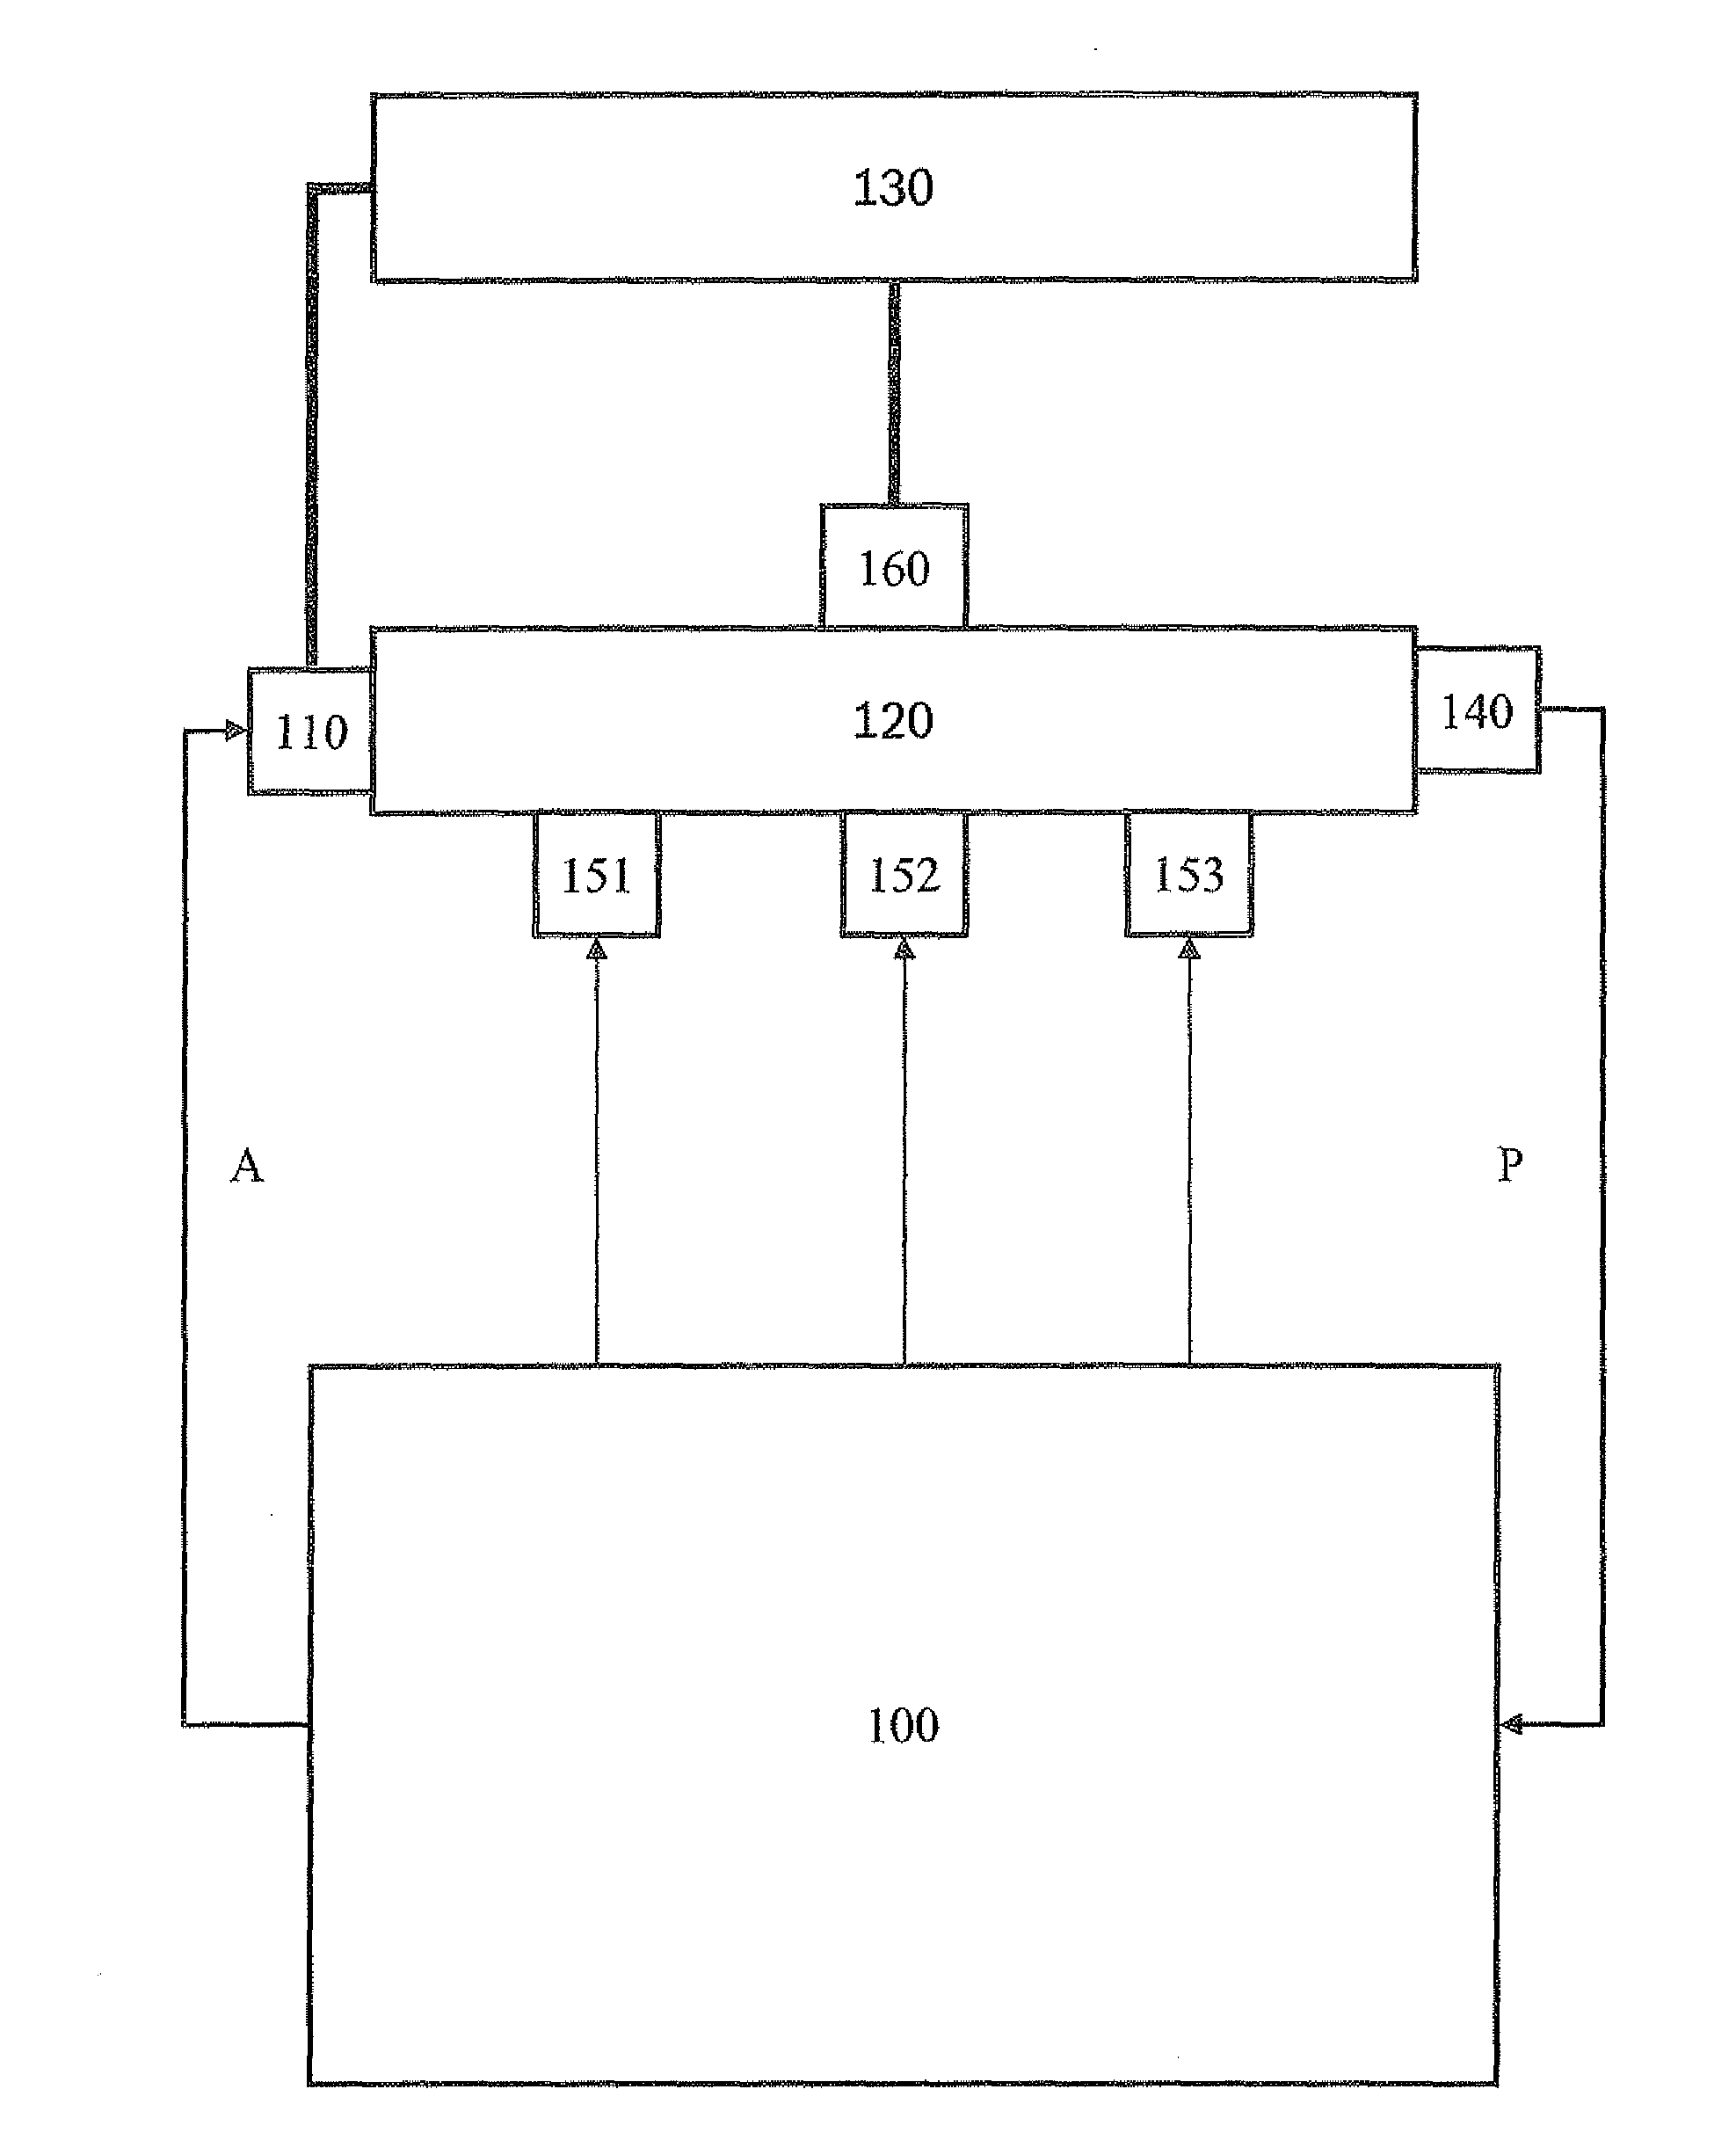 Method and device for controlling a fuel metering system